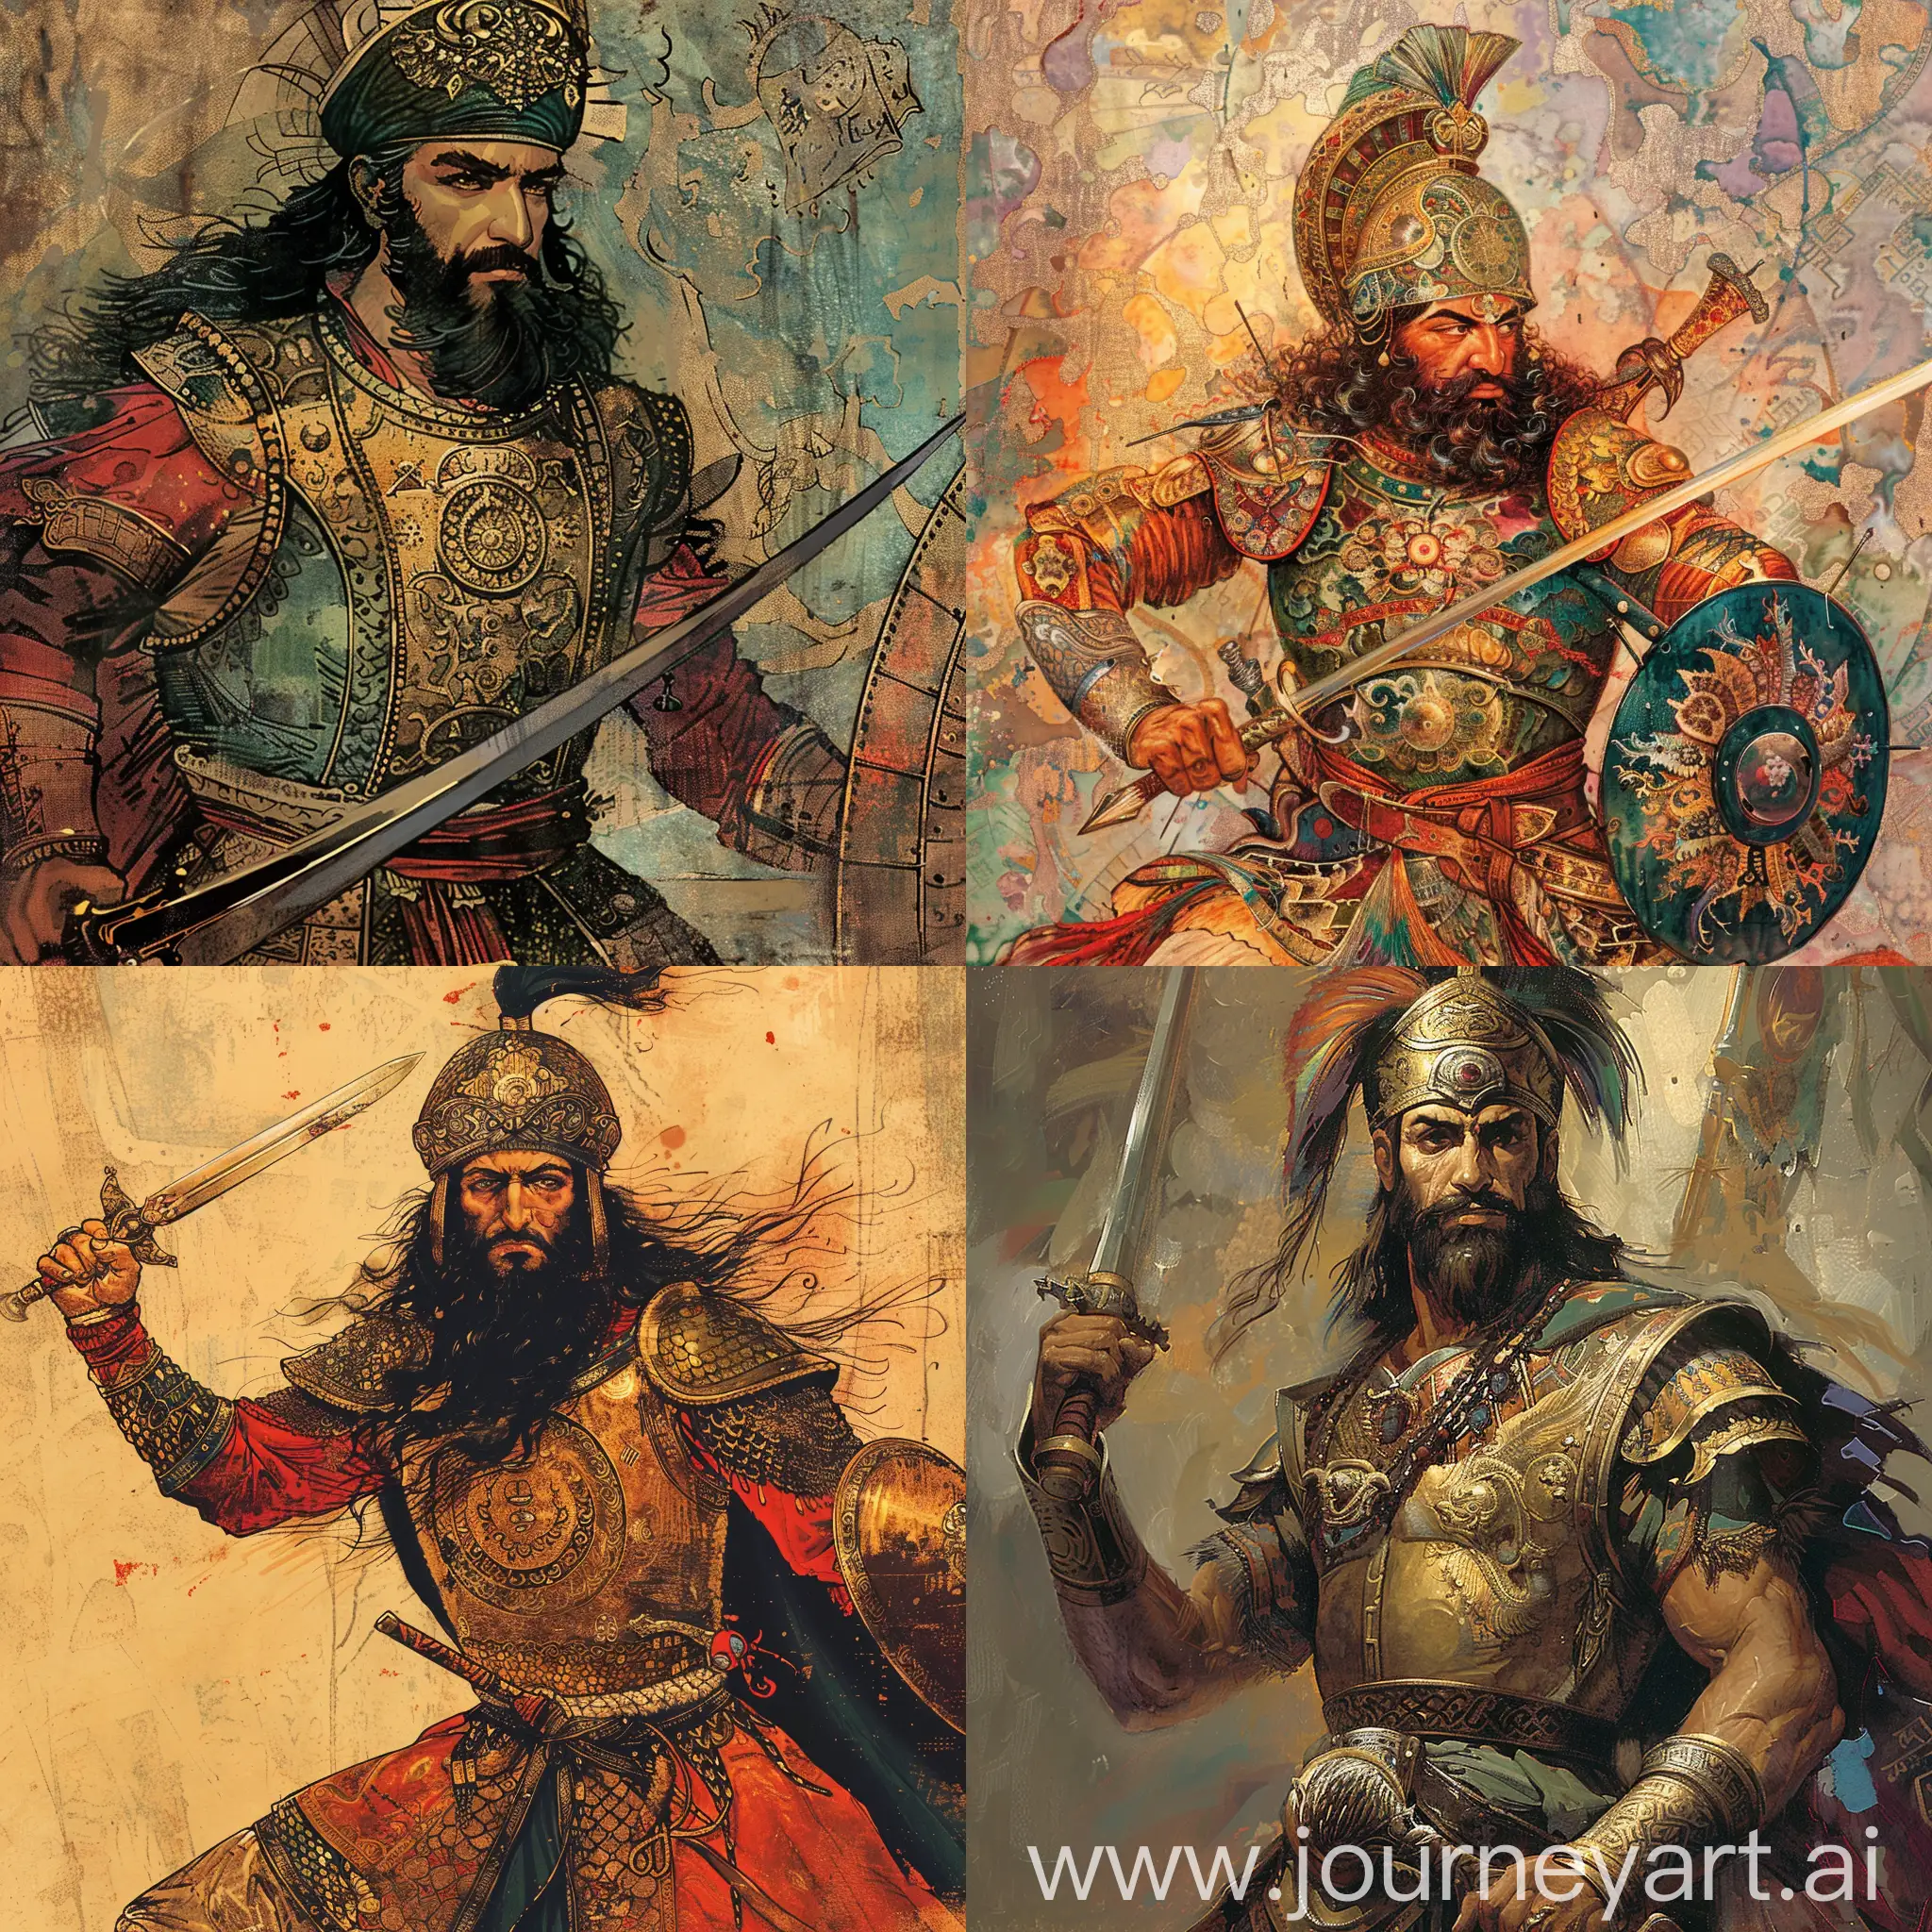 Heroic-Portrait-of-Rostam-the-Iranian-Warrior-from-Shahnameh